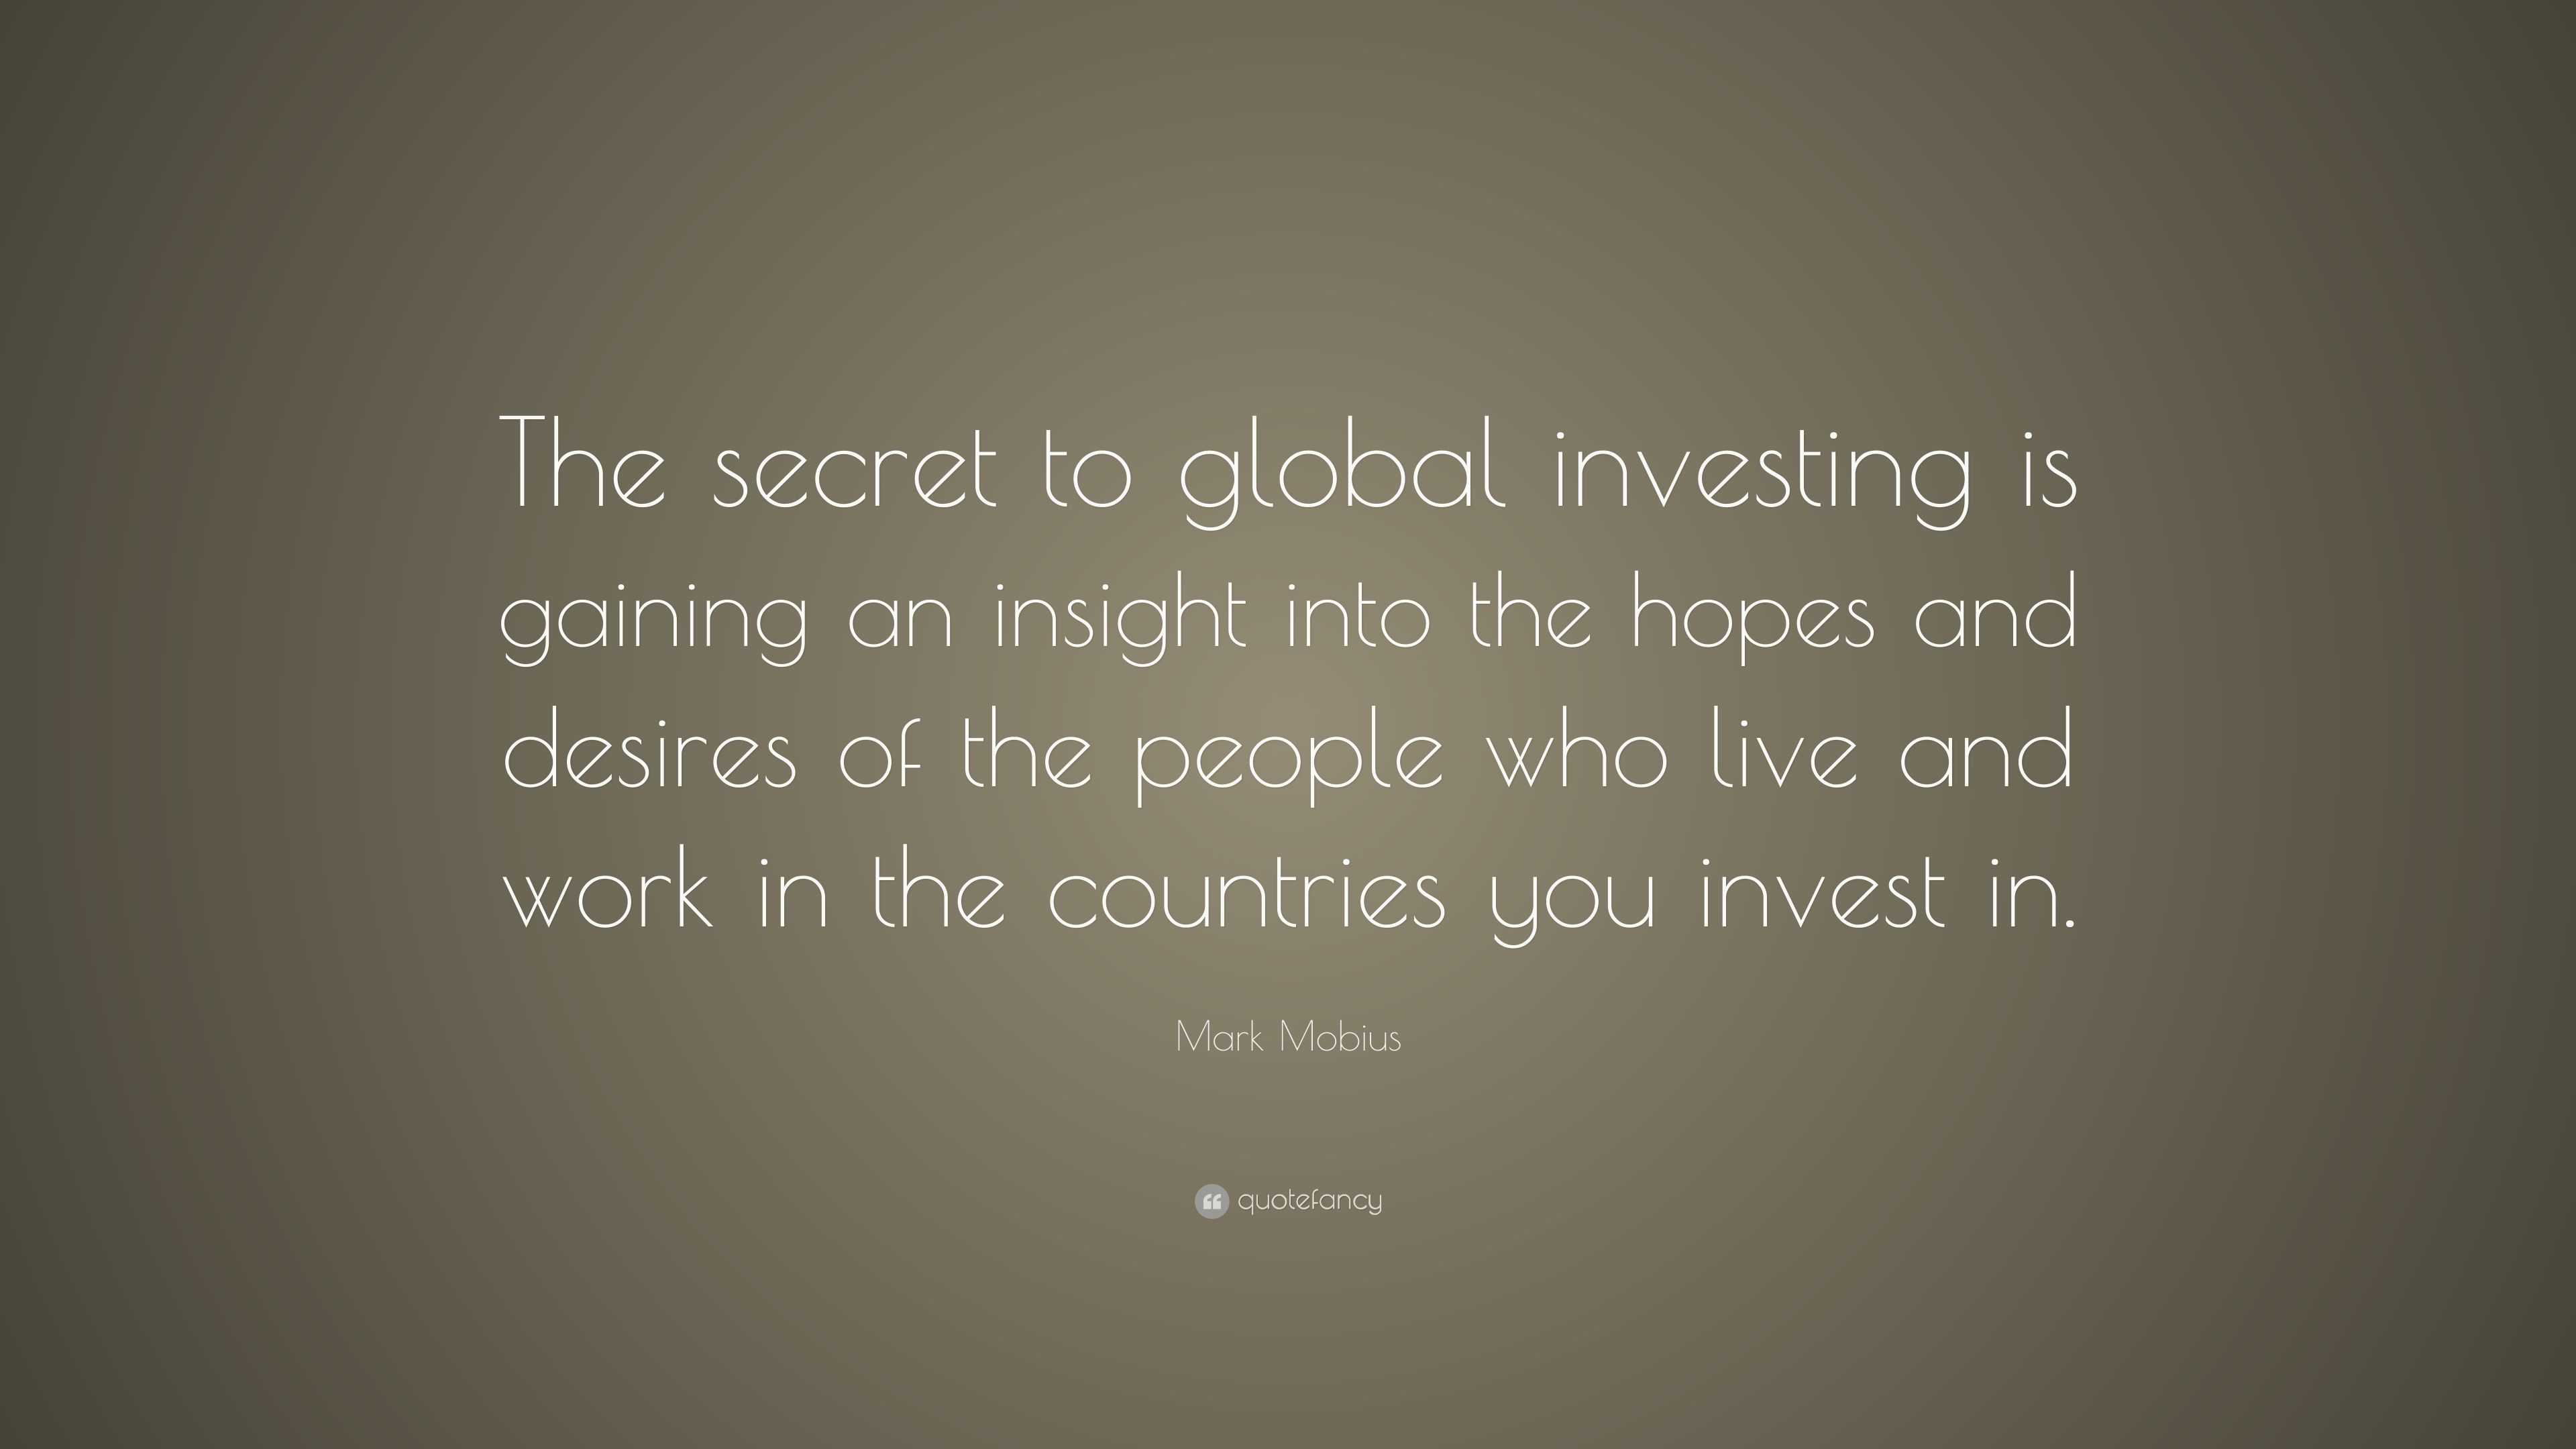 Mark Mobius Quote: “The secret to global investing is gaining an ...